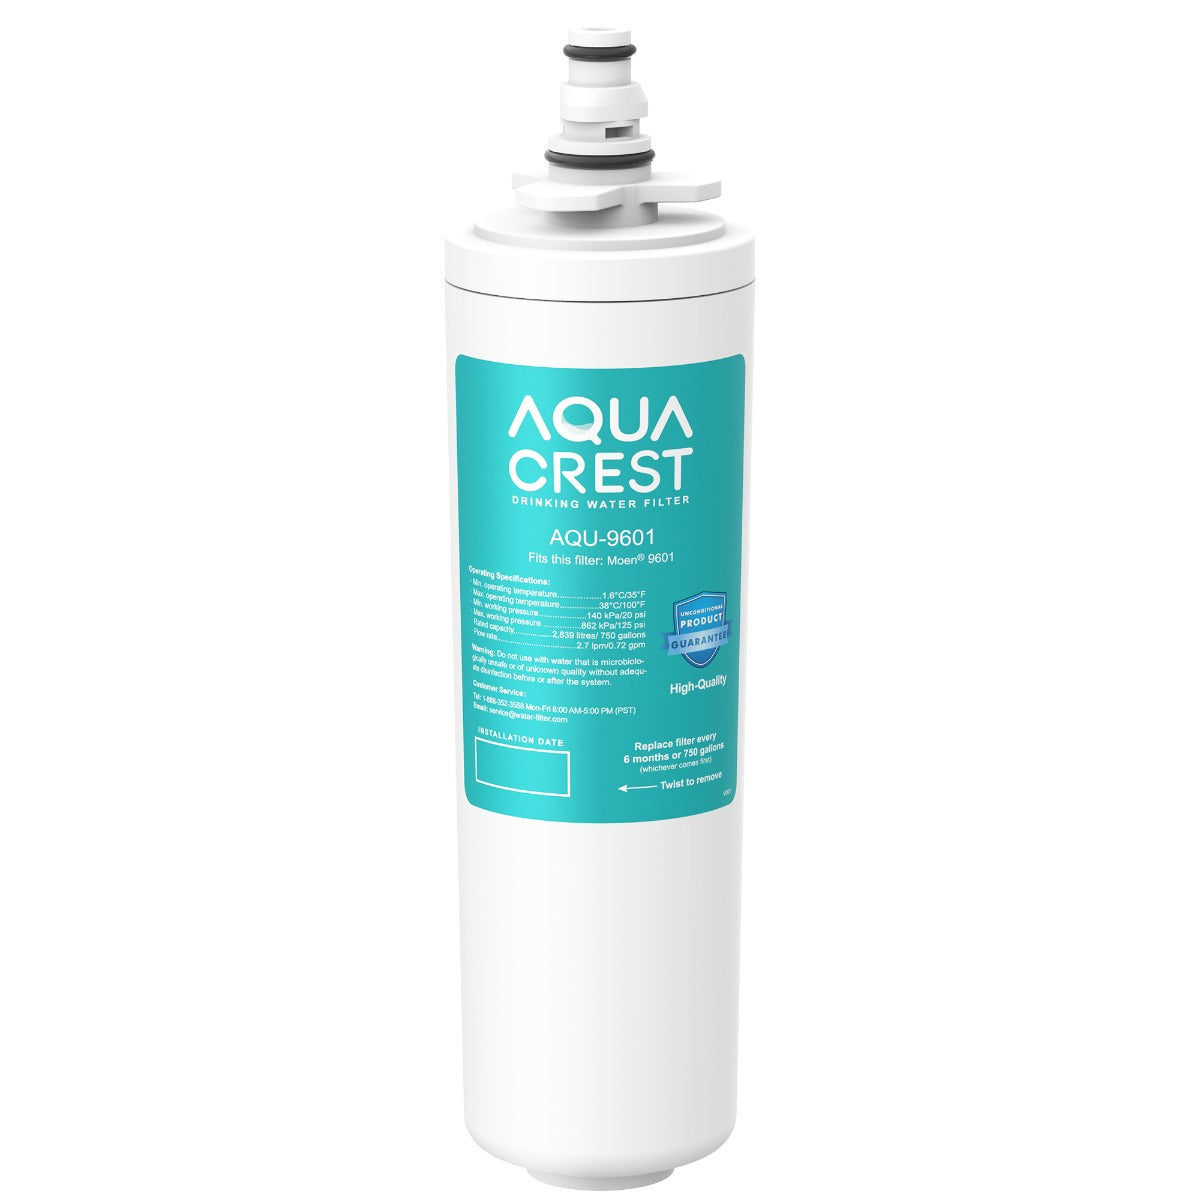 AQUACREST Under Sink Water Filter Replacement for Moen ChoiceFlo 9601 Water Filter